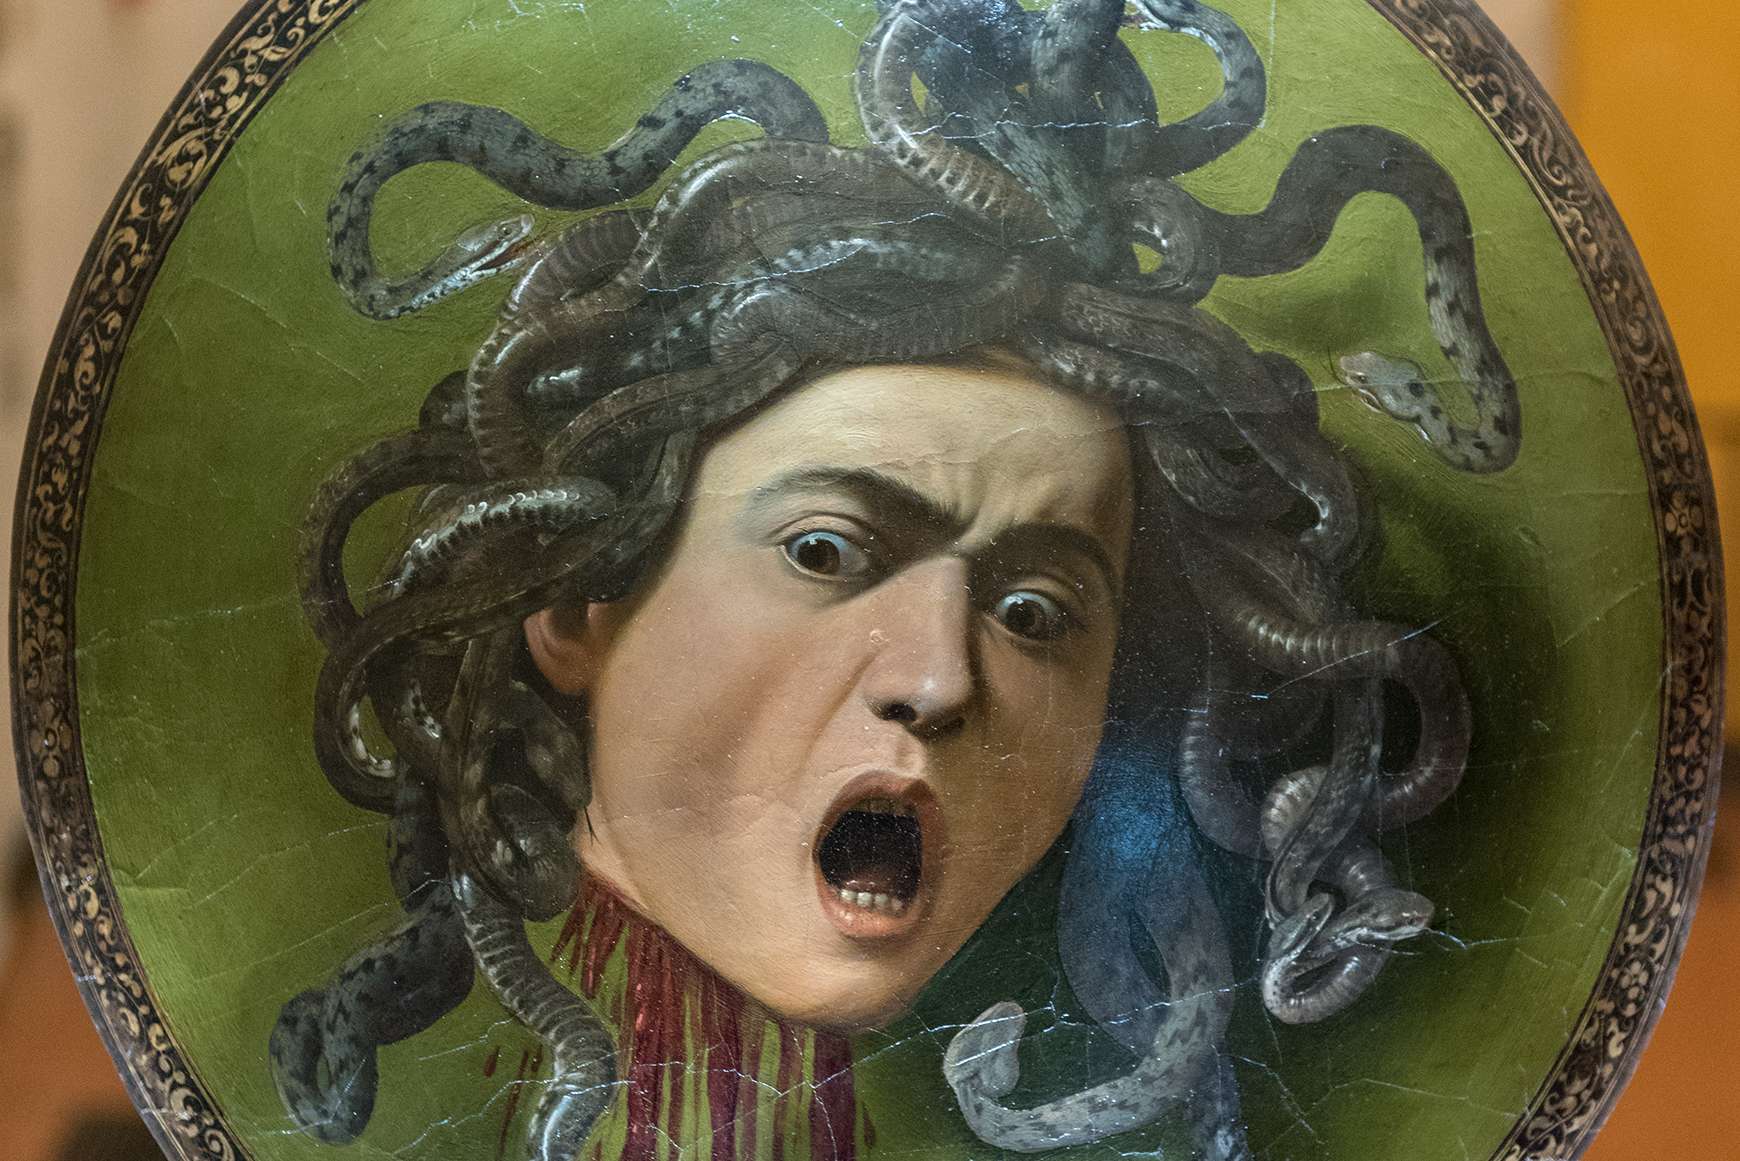 Face of Medusa with open mouth by Caravaggio